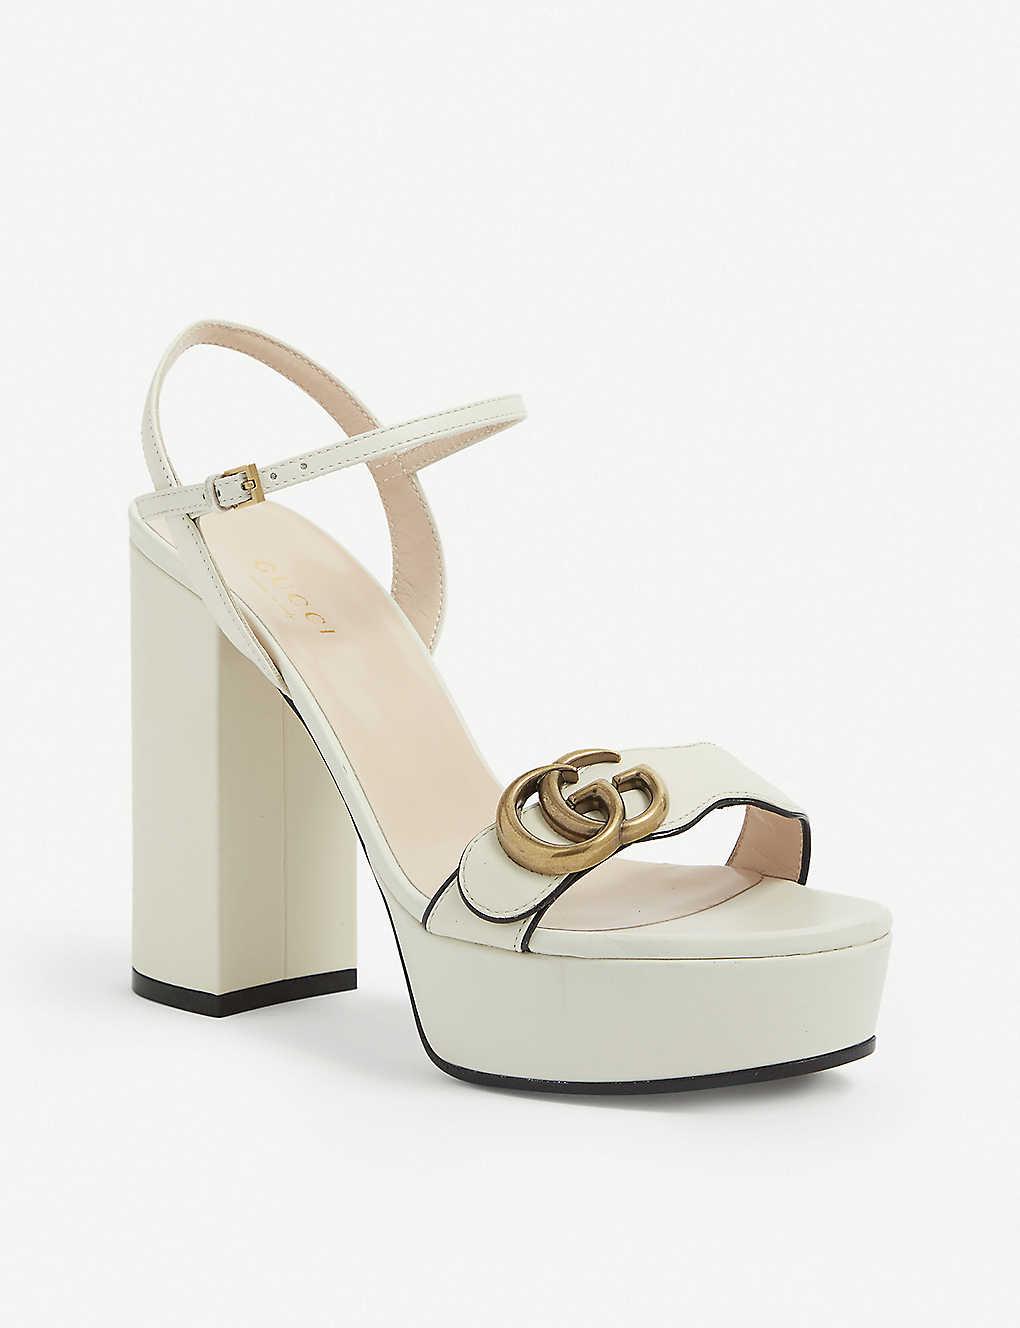 Gucci Marmont 85 Buckle Leather Platform Sandals in White - Lyst